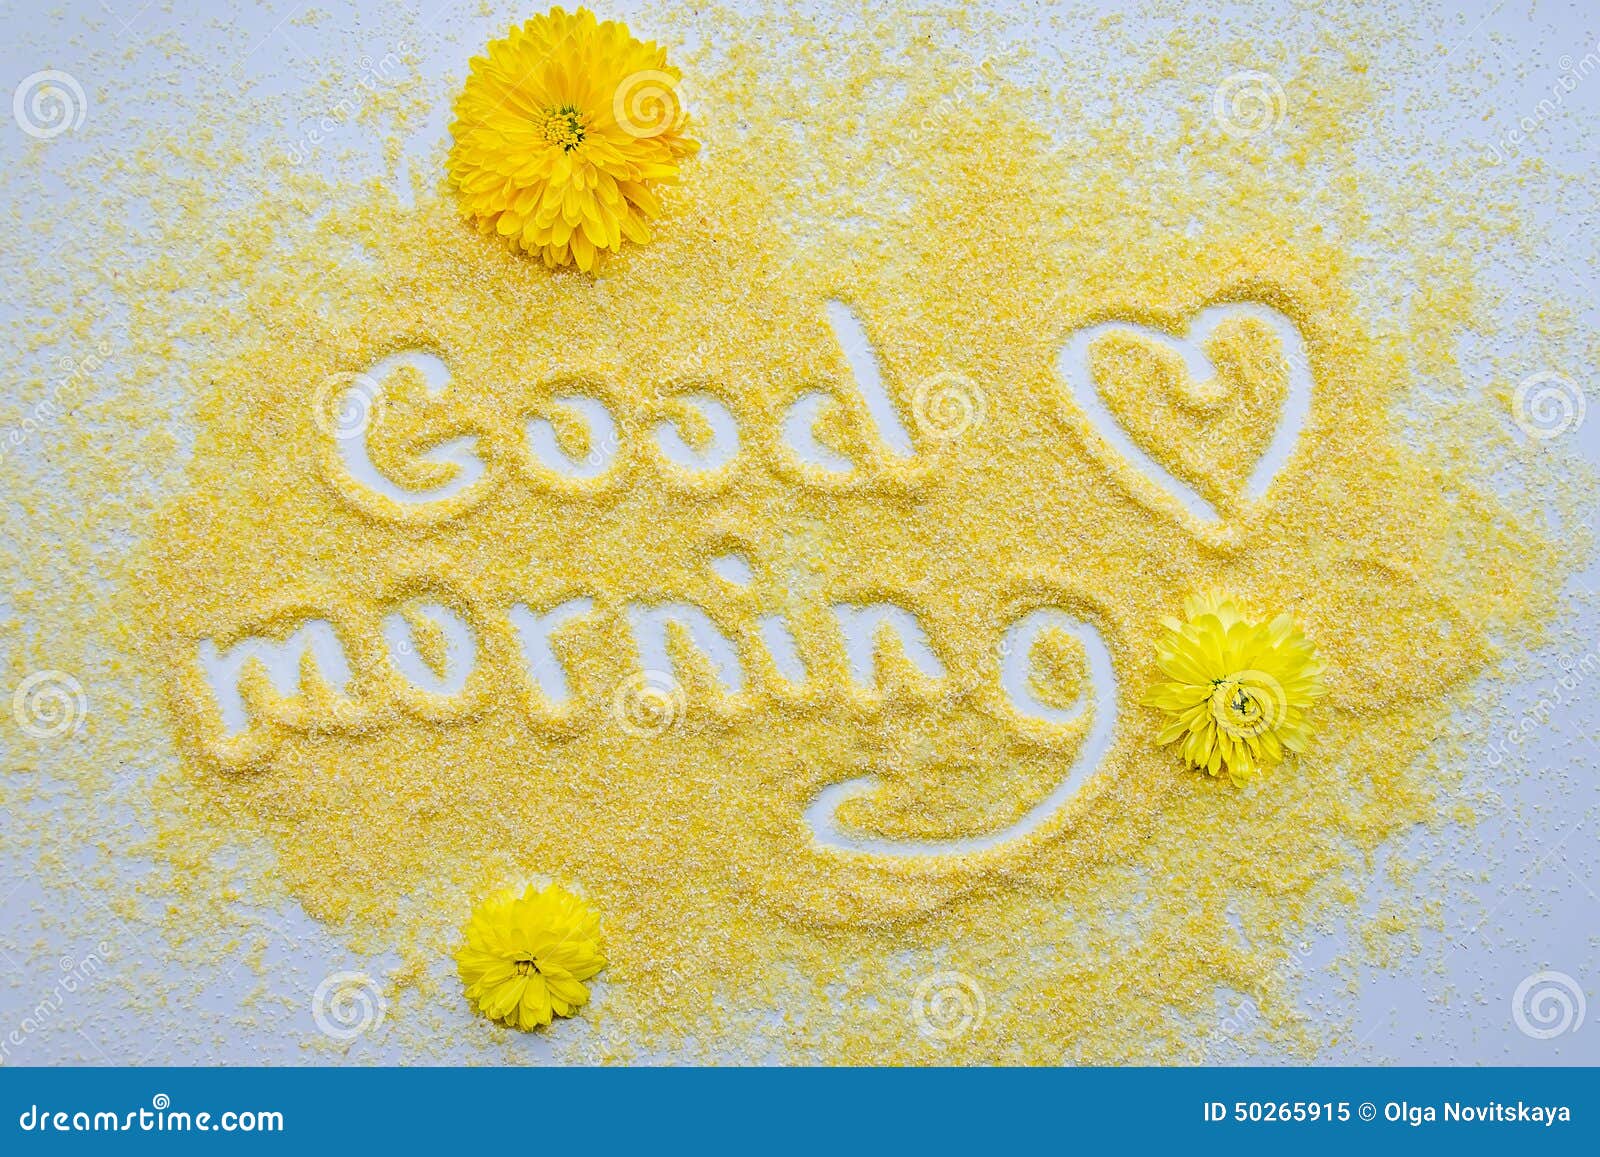 121,980 Good Morning Stock Photos - Free & Royalty-Free Stock Photos from  Dreamstime